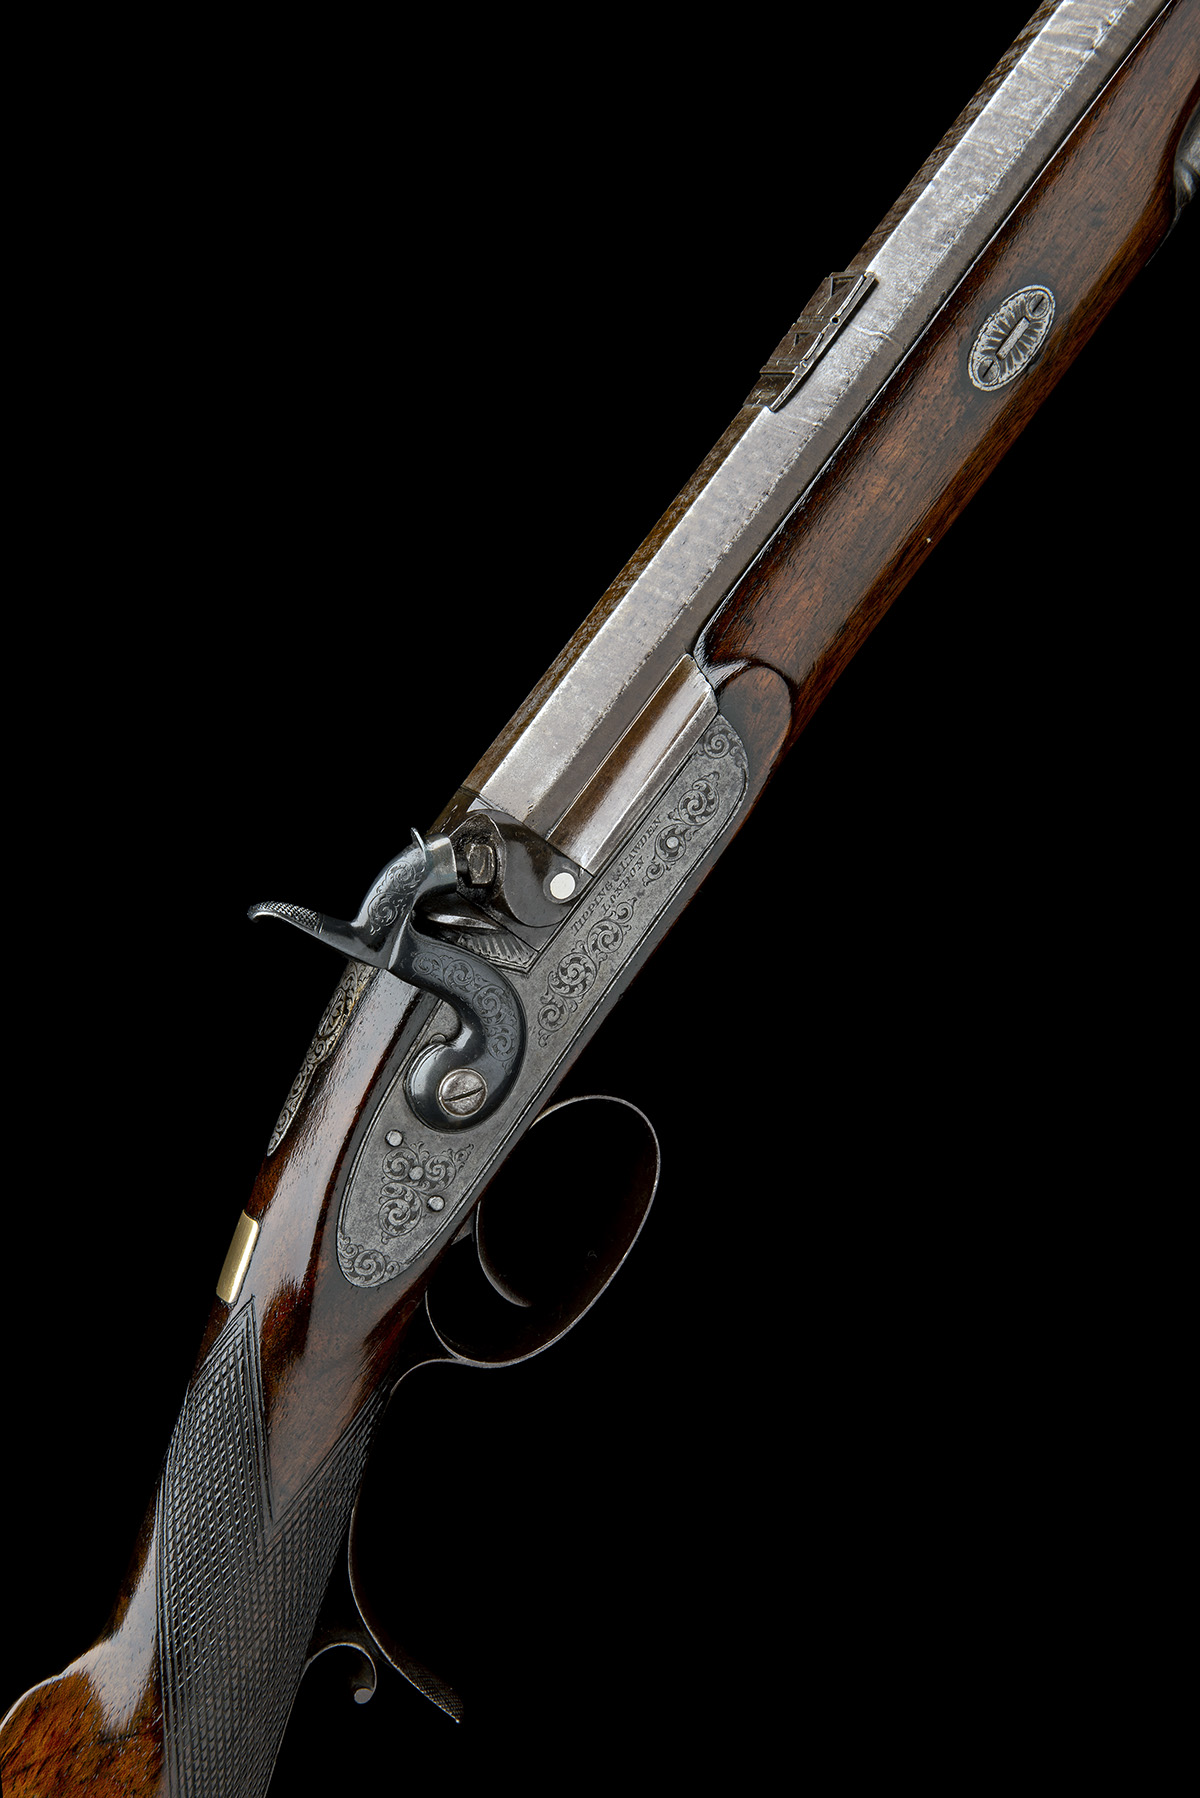 TIPPING & LAWDEN, LONDON A 20-BORE PERCUSSION SINGLE-BARRELLED SPORTING-RIFLE, no visible serial